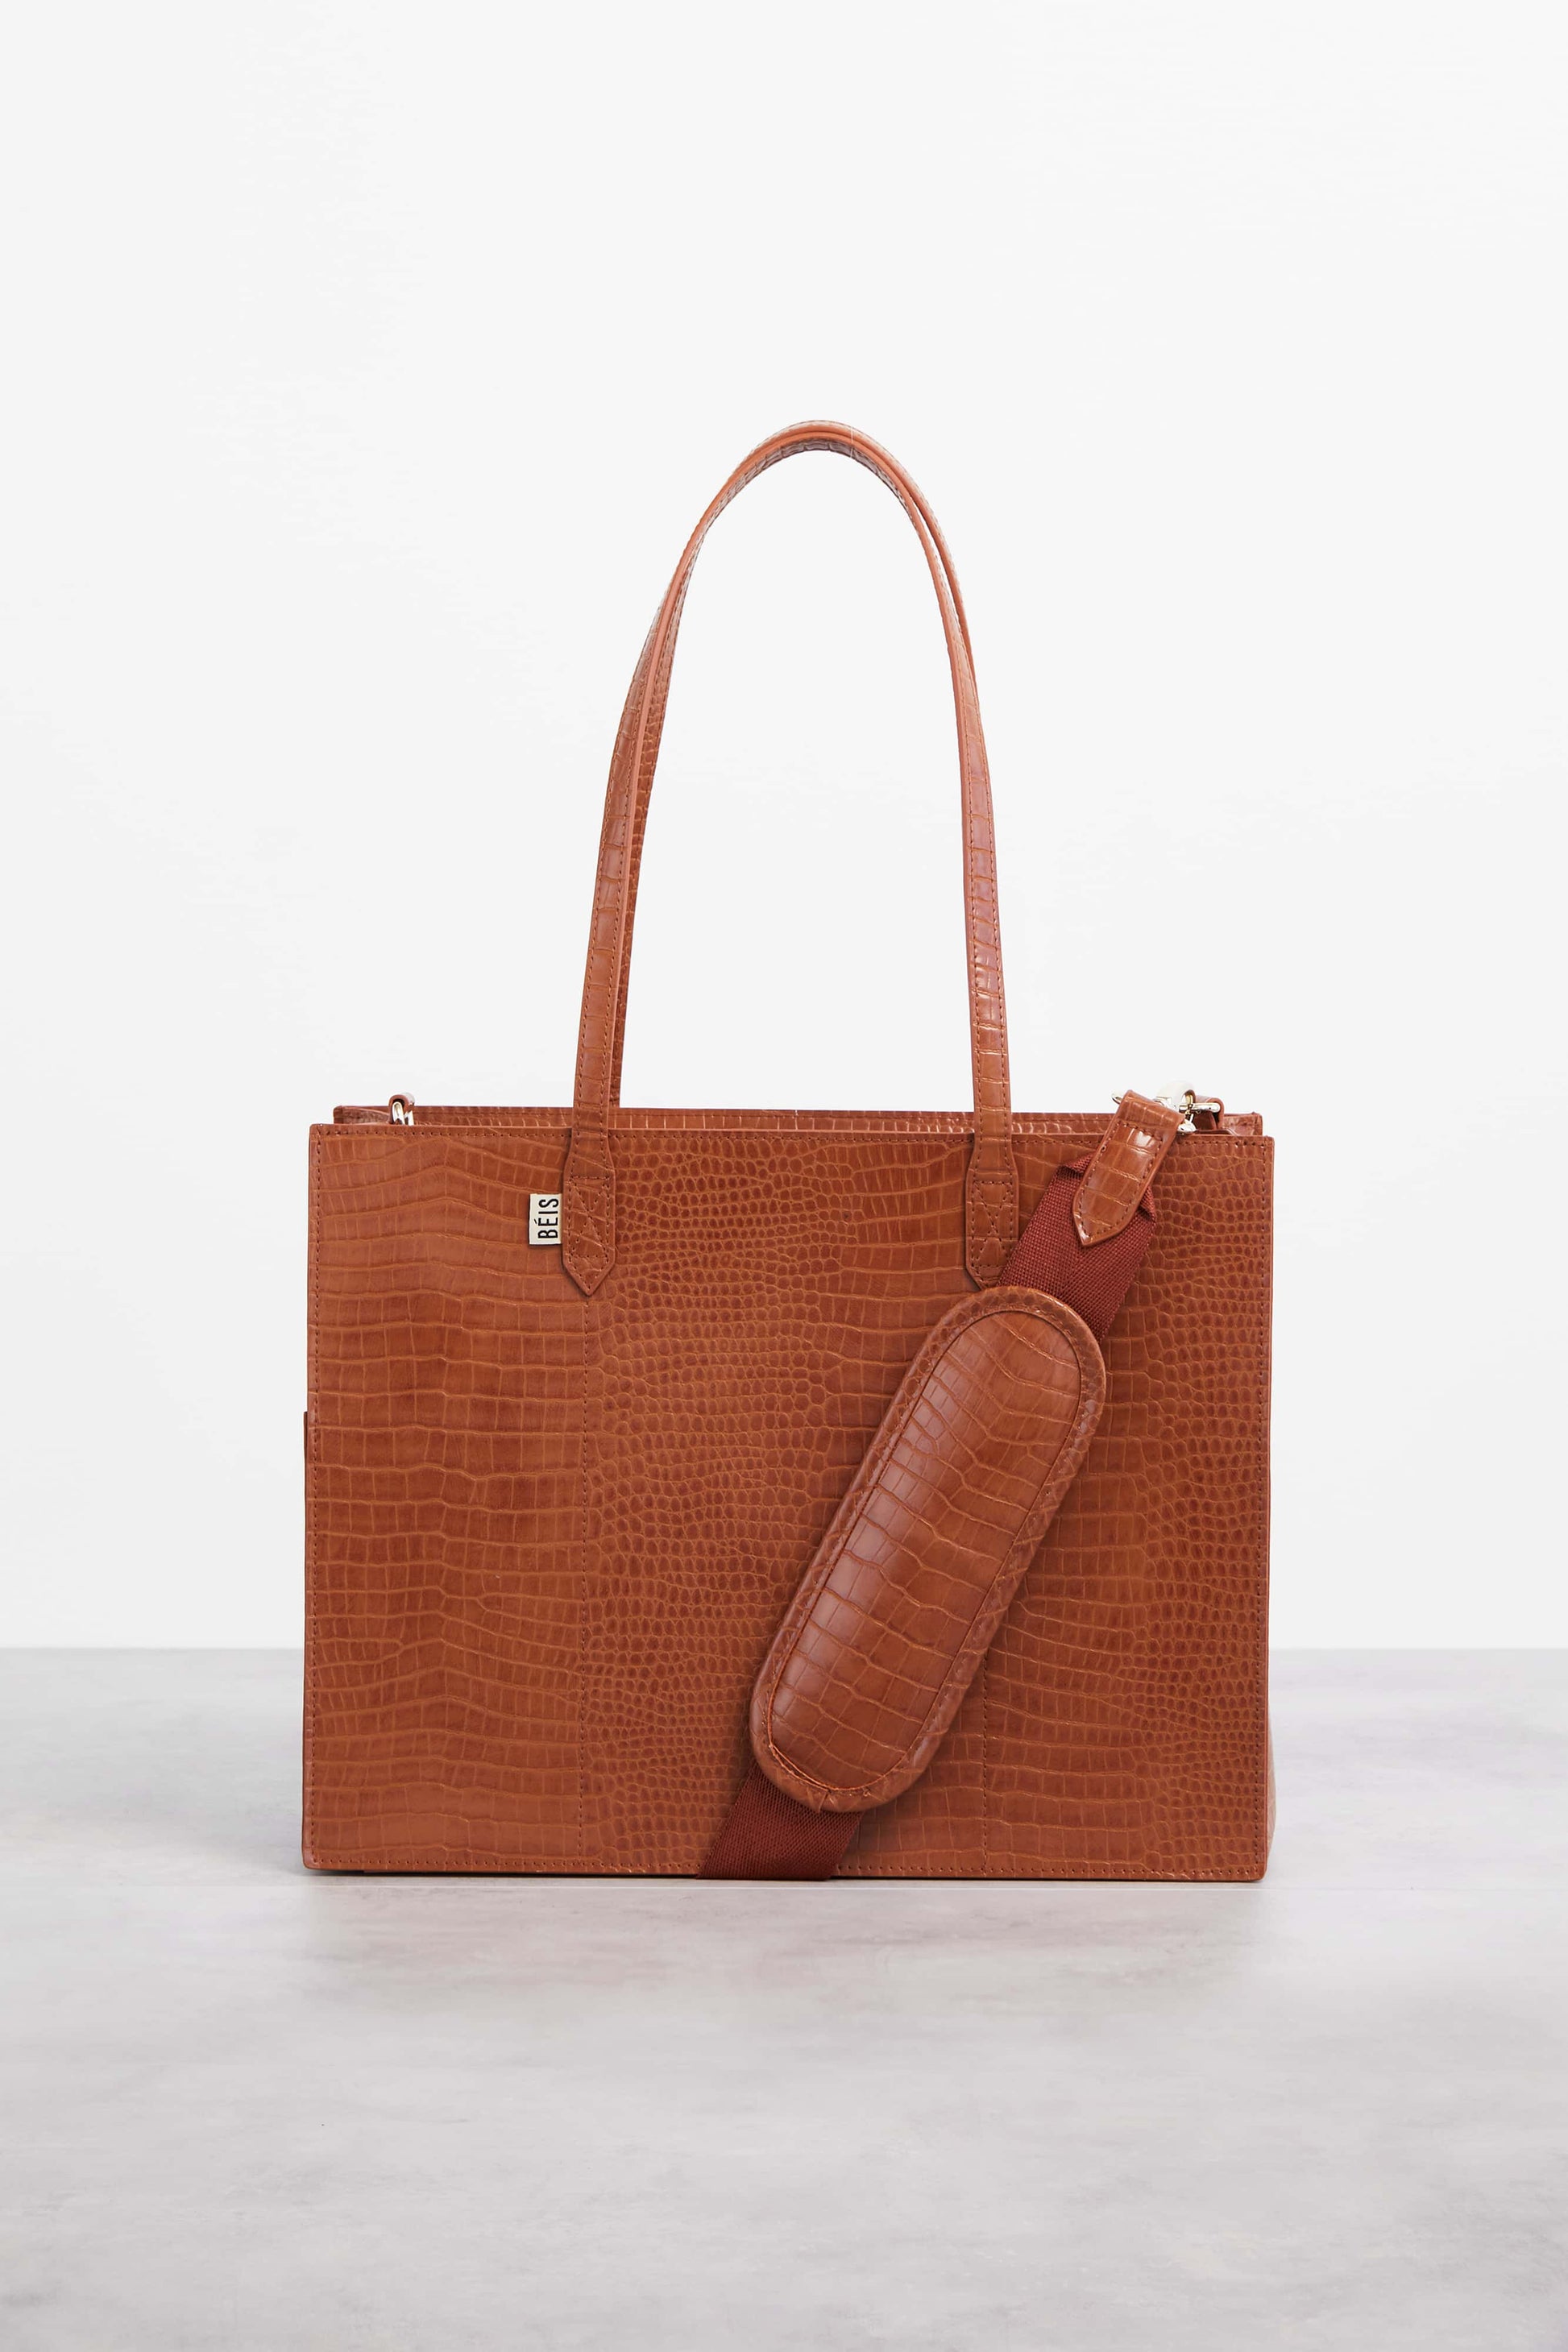 Mini Work Tote in Cognac Croc Front with Shoulder Strap